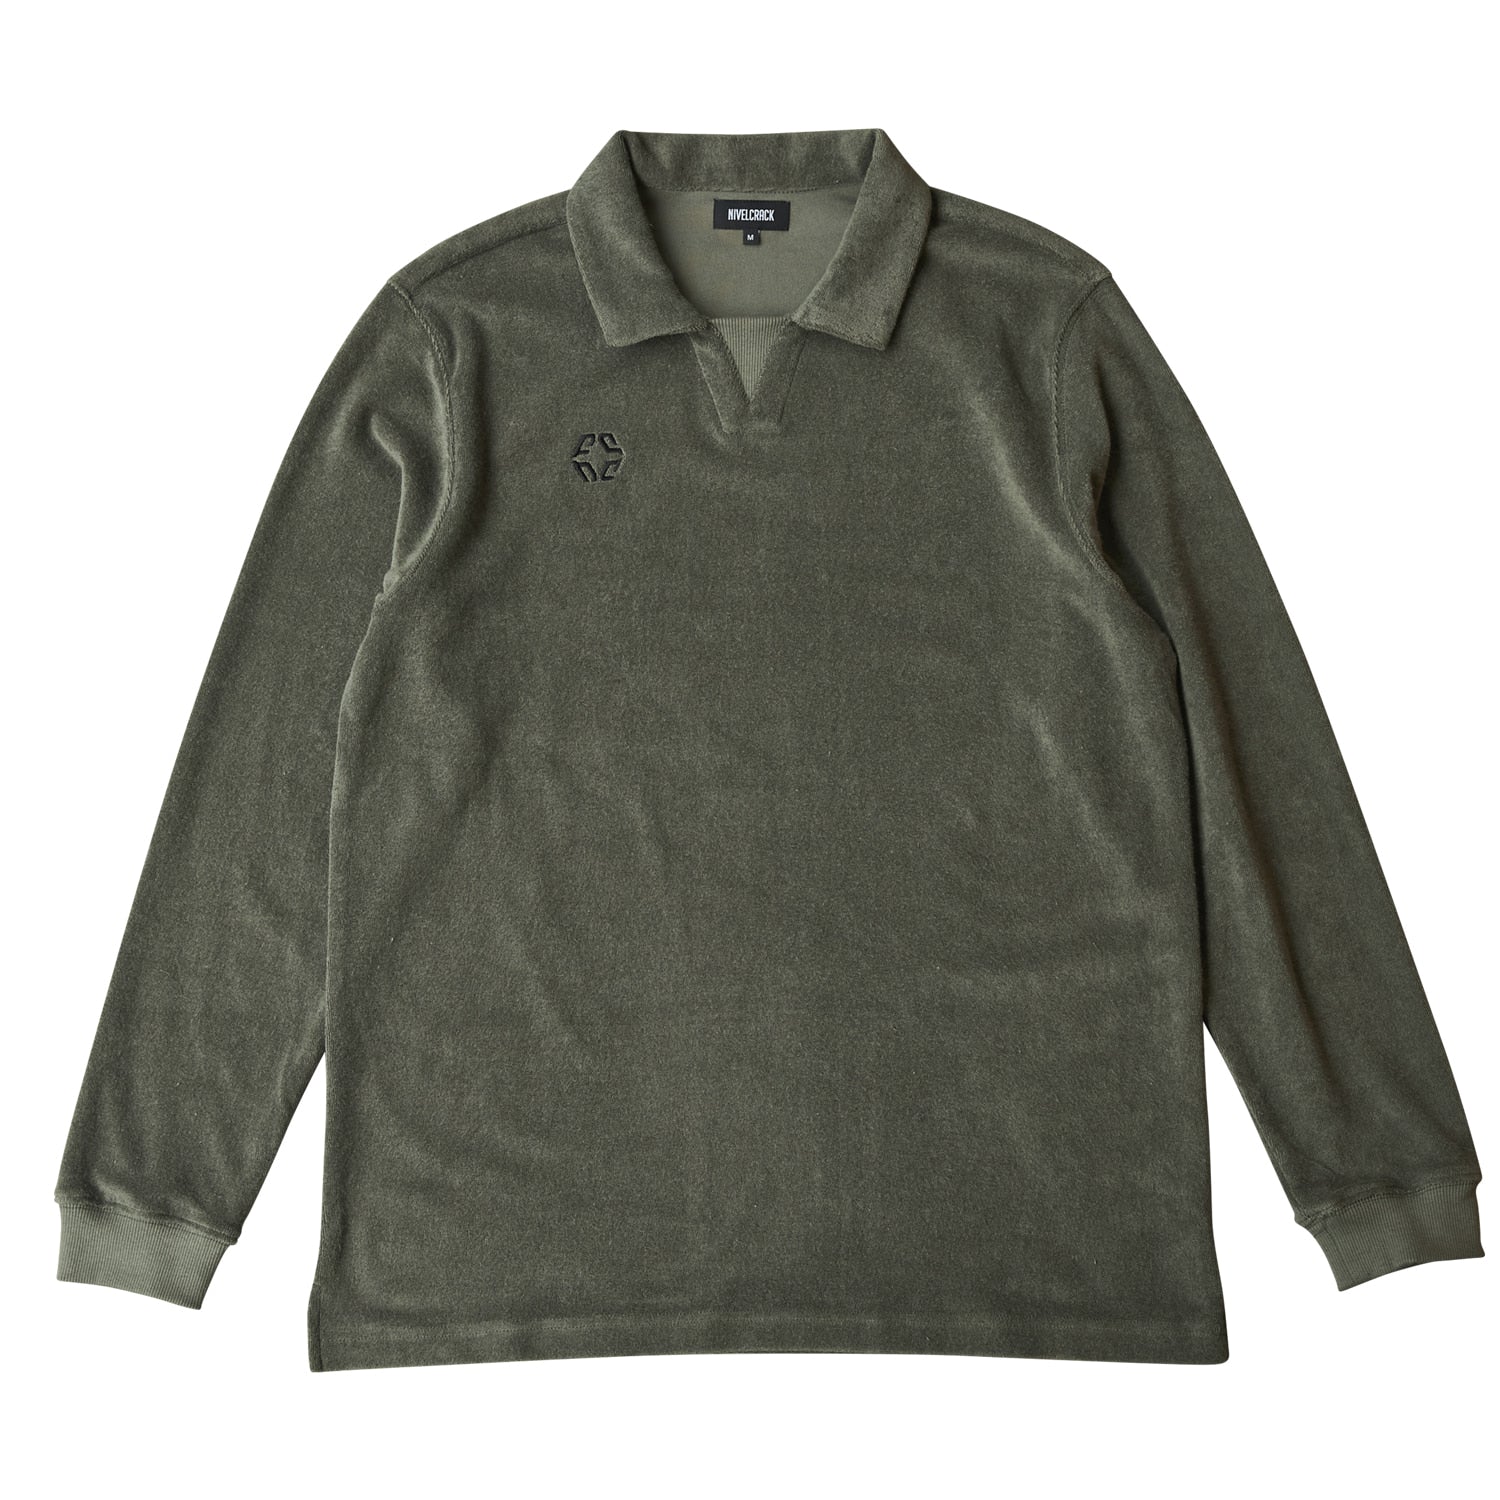 Nivelcrack Terry Drill Top - Olive Green